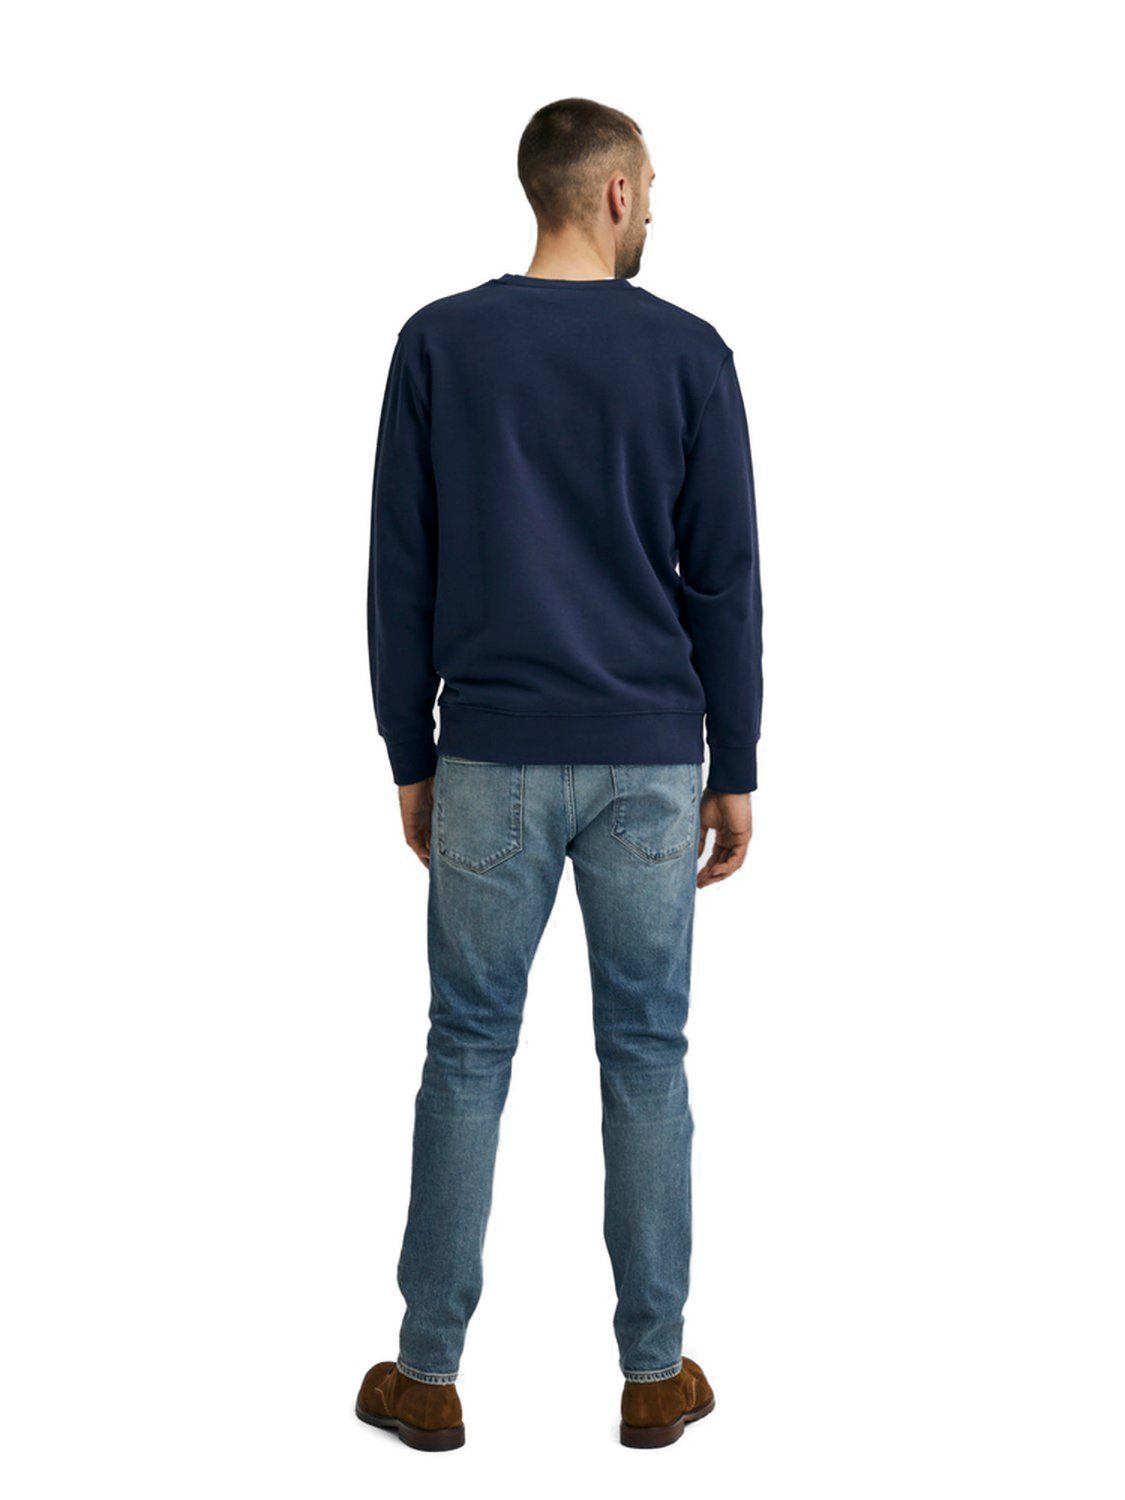 6290 SLH175-SLIM SELECTED Stretch HOMME mit Slim-fit-Jeans LEON